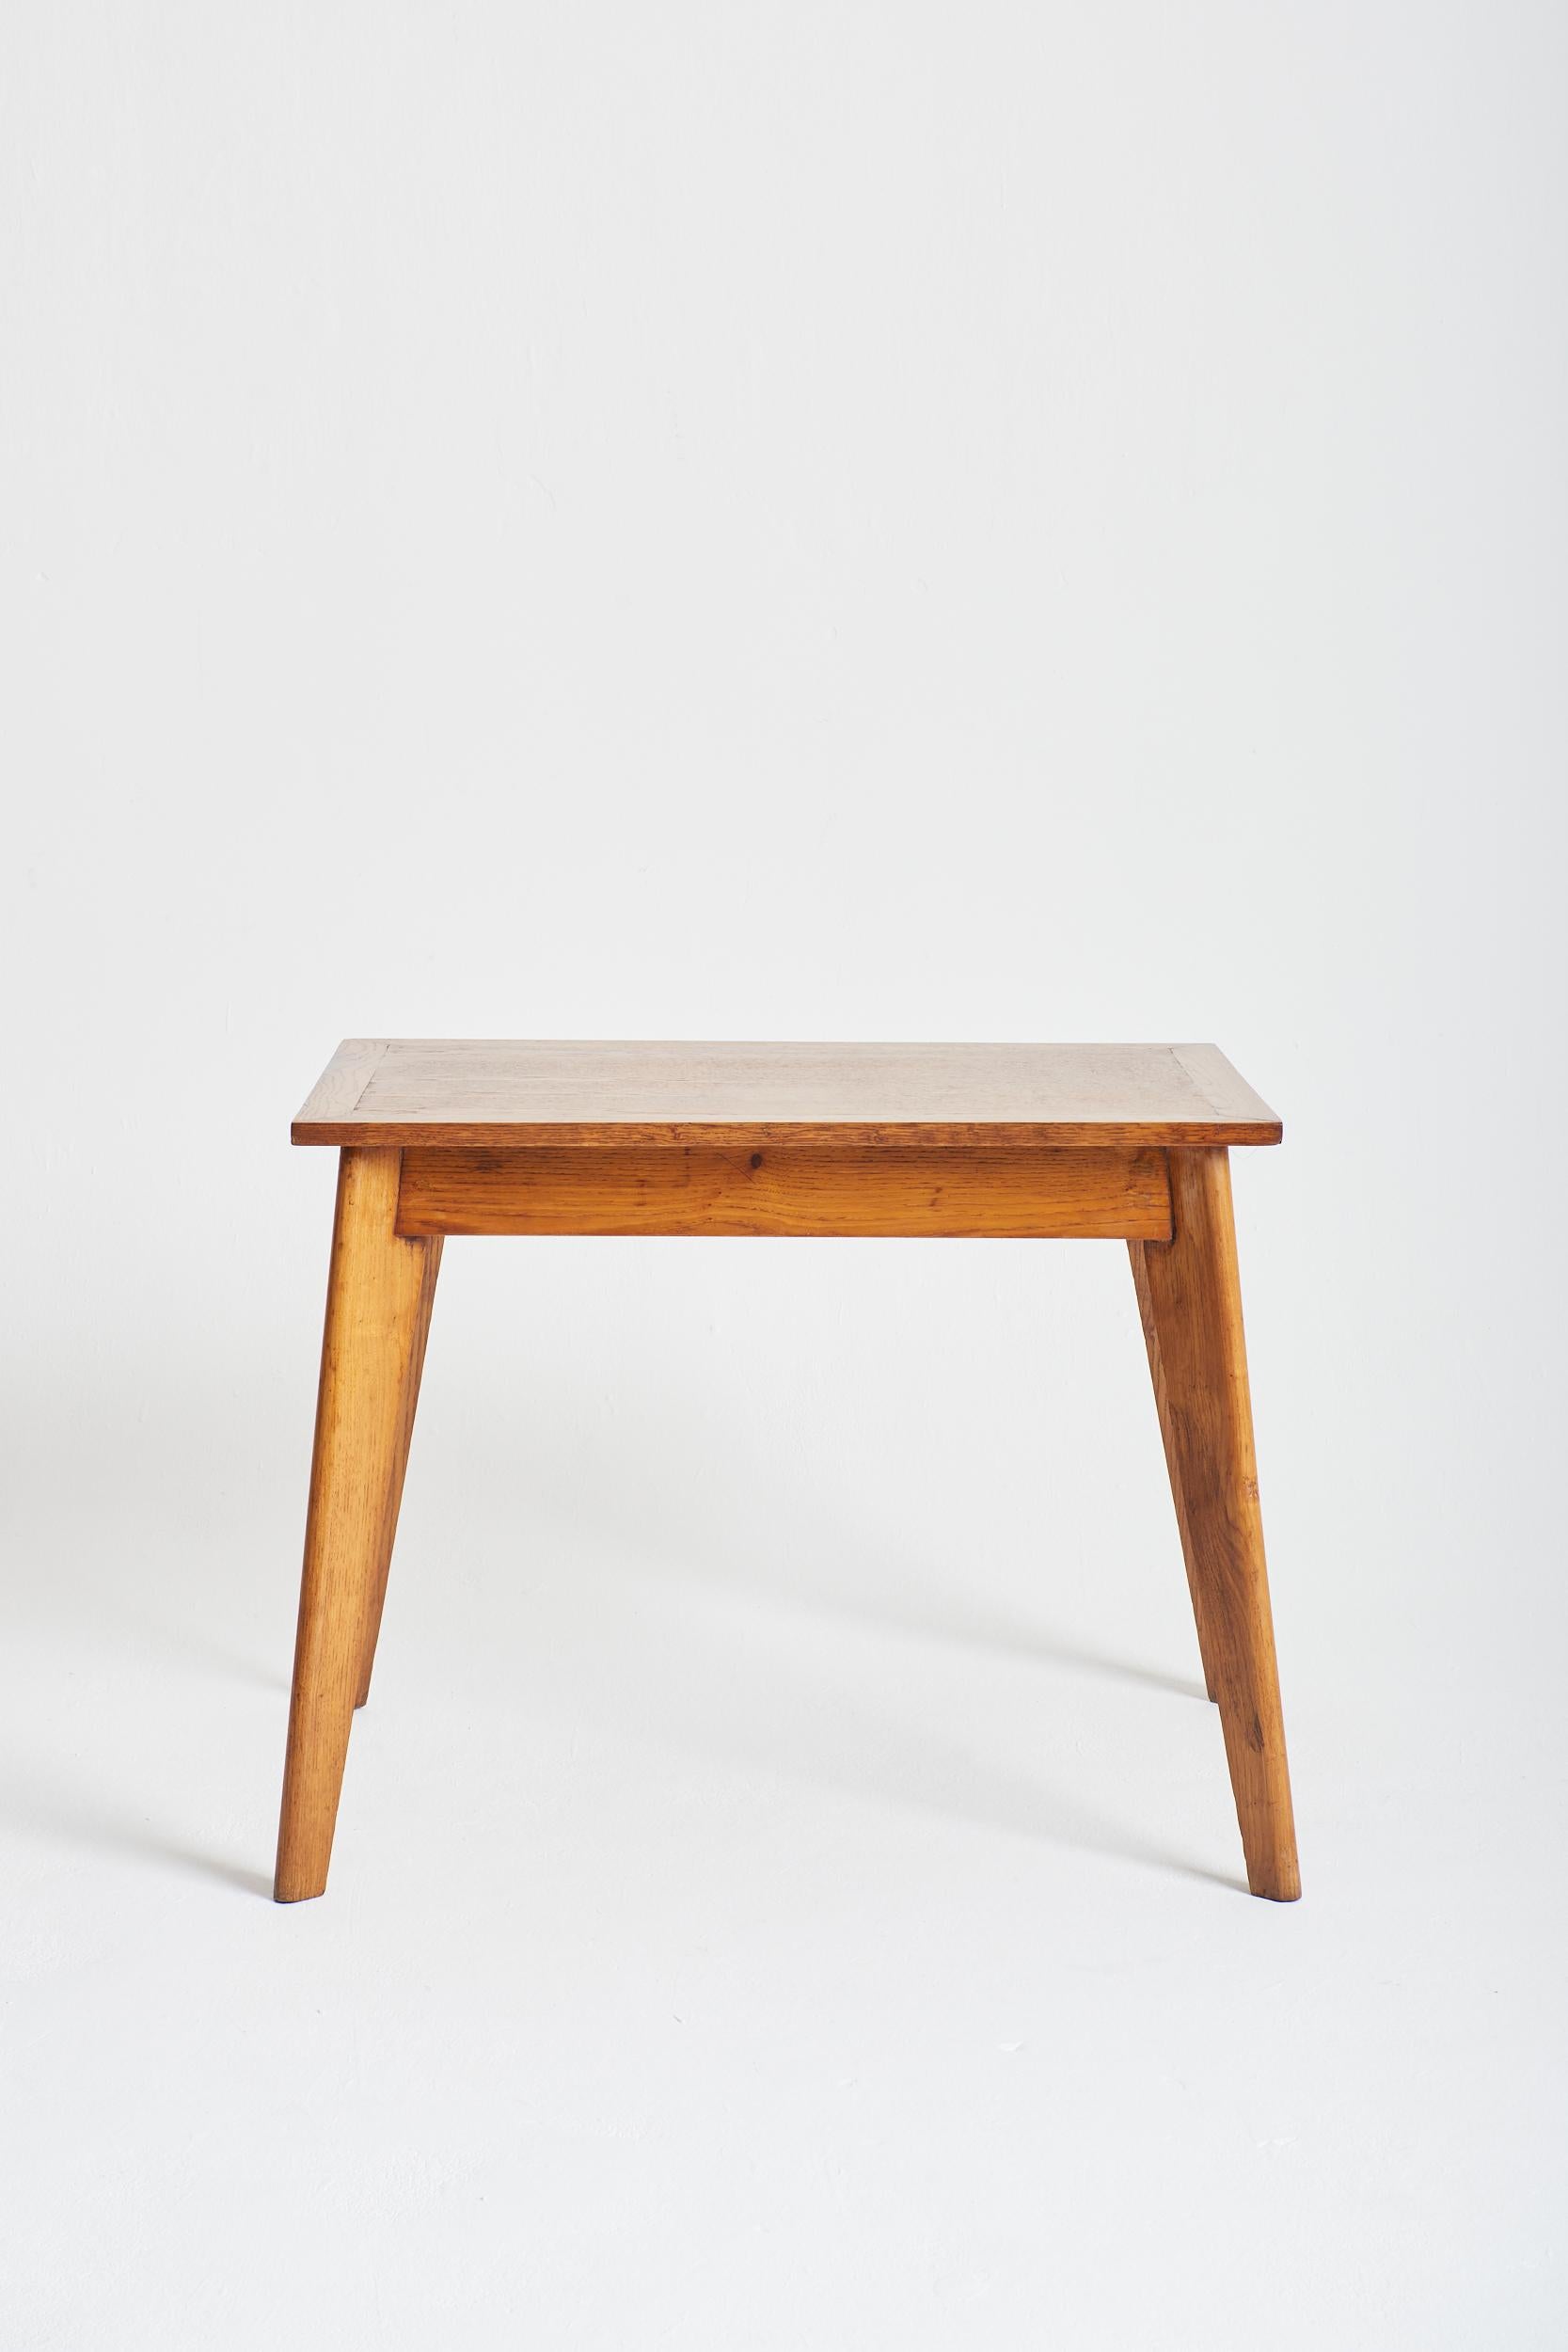 An oak writting table, in the manner of Jean Prouvé.
France, Circa 1950.
Top: 90 cm by 60 cm.
Legs floor imprint: 97 cm wide by 69 cm deep.
71 cm high, knee clearance: 59 cm.